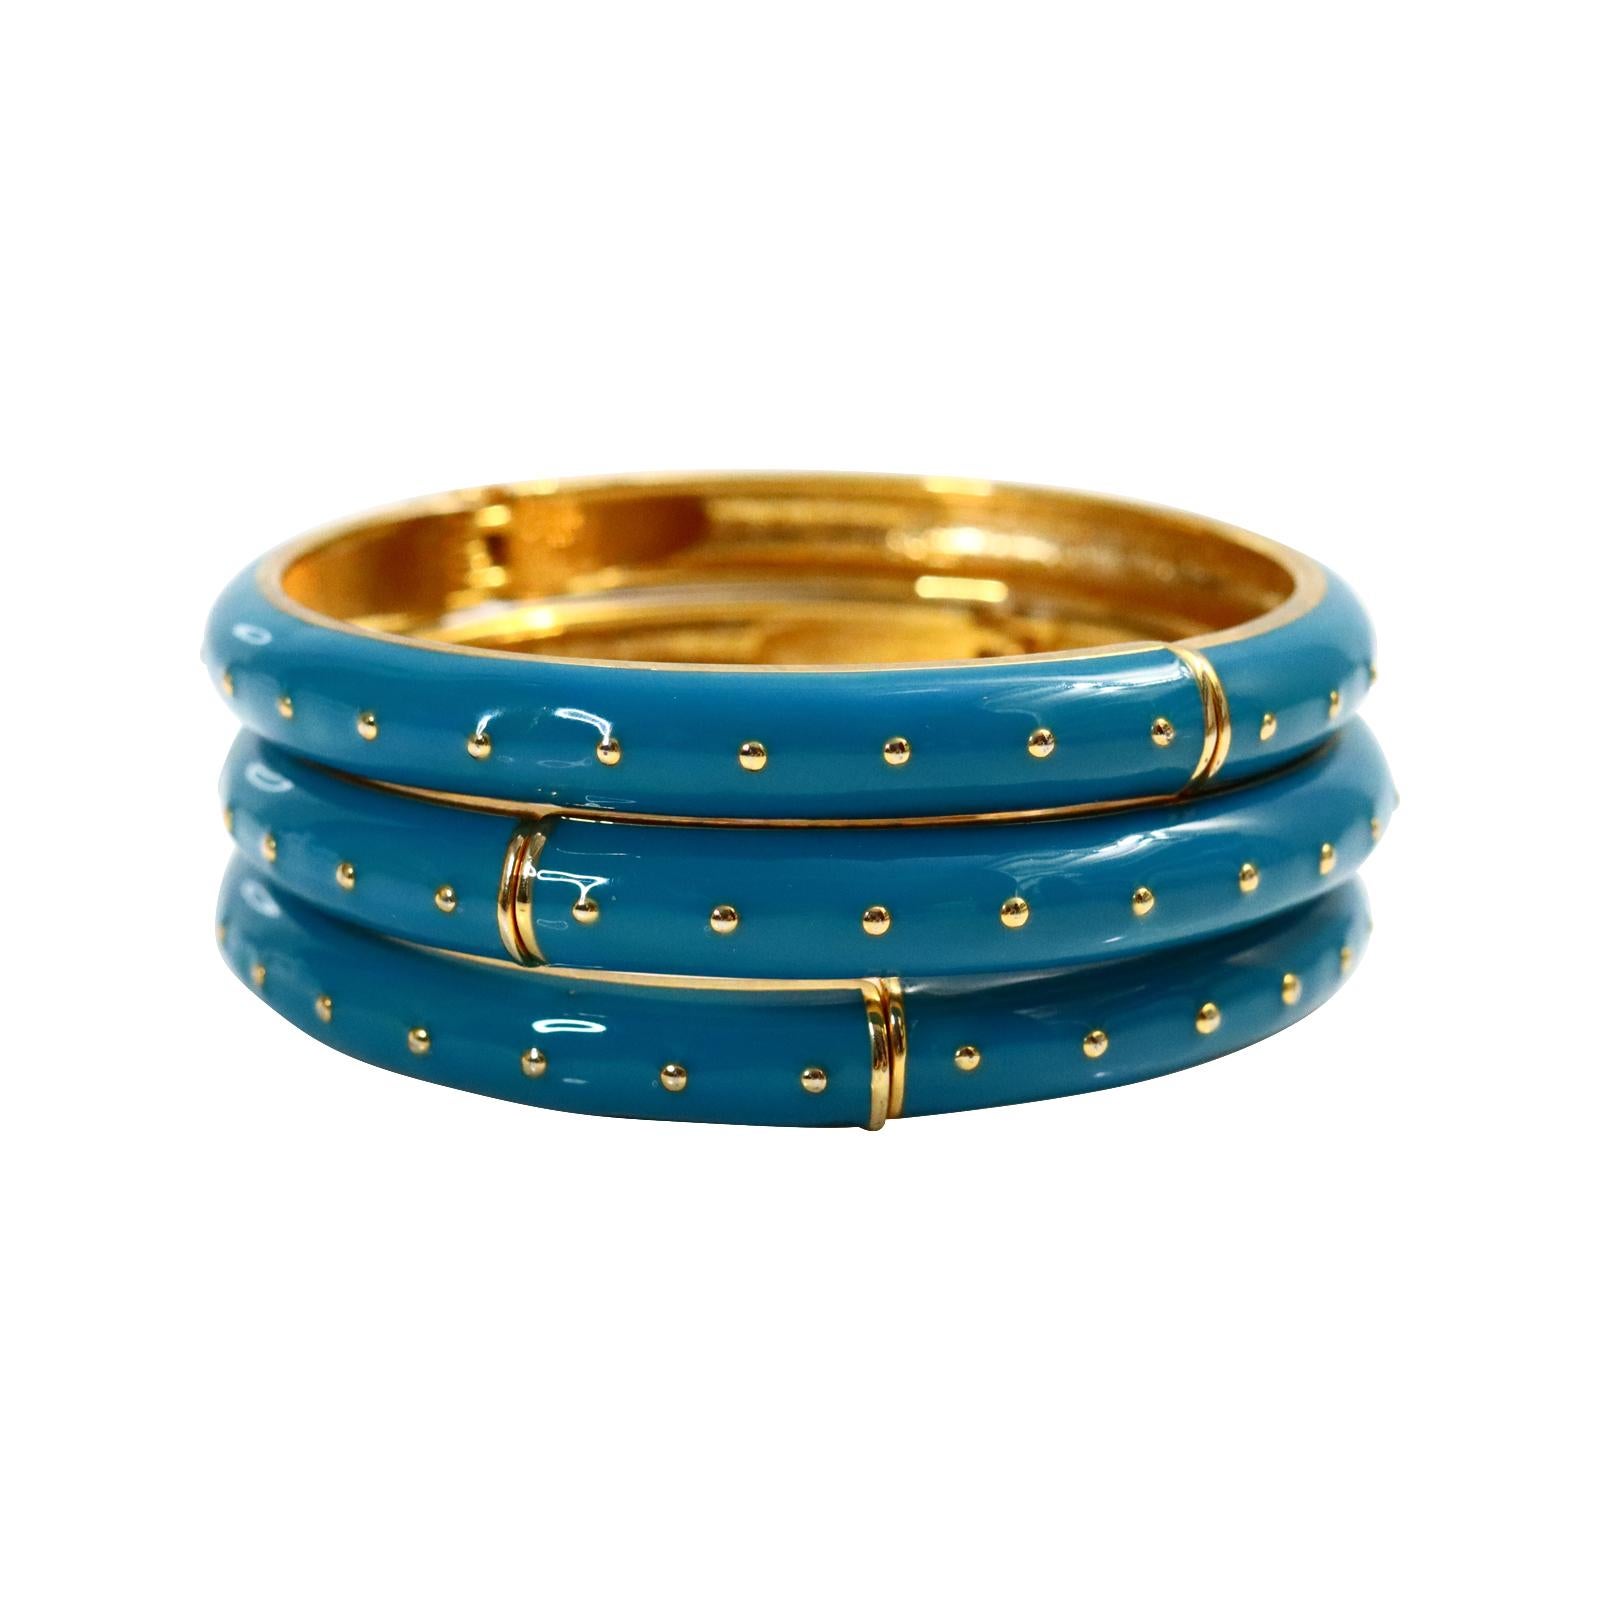 Contemporary Vintage Turquoise Enamel and Gold Clamper Set of 3 Bracelets, circa 1990s For Sale